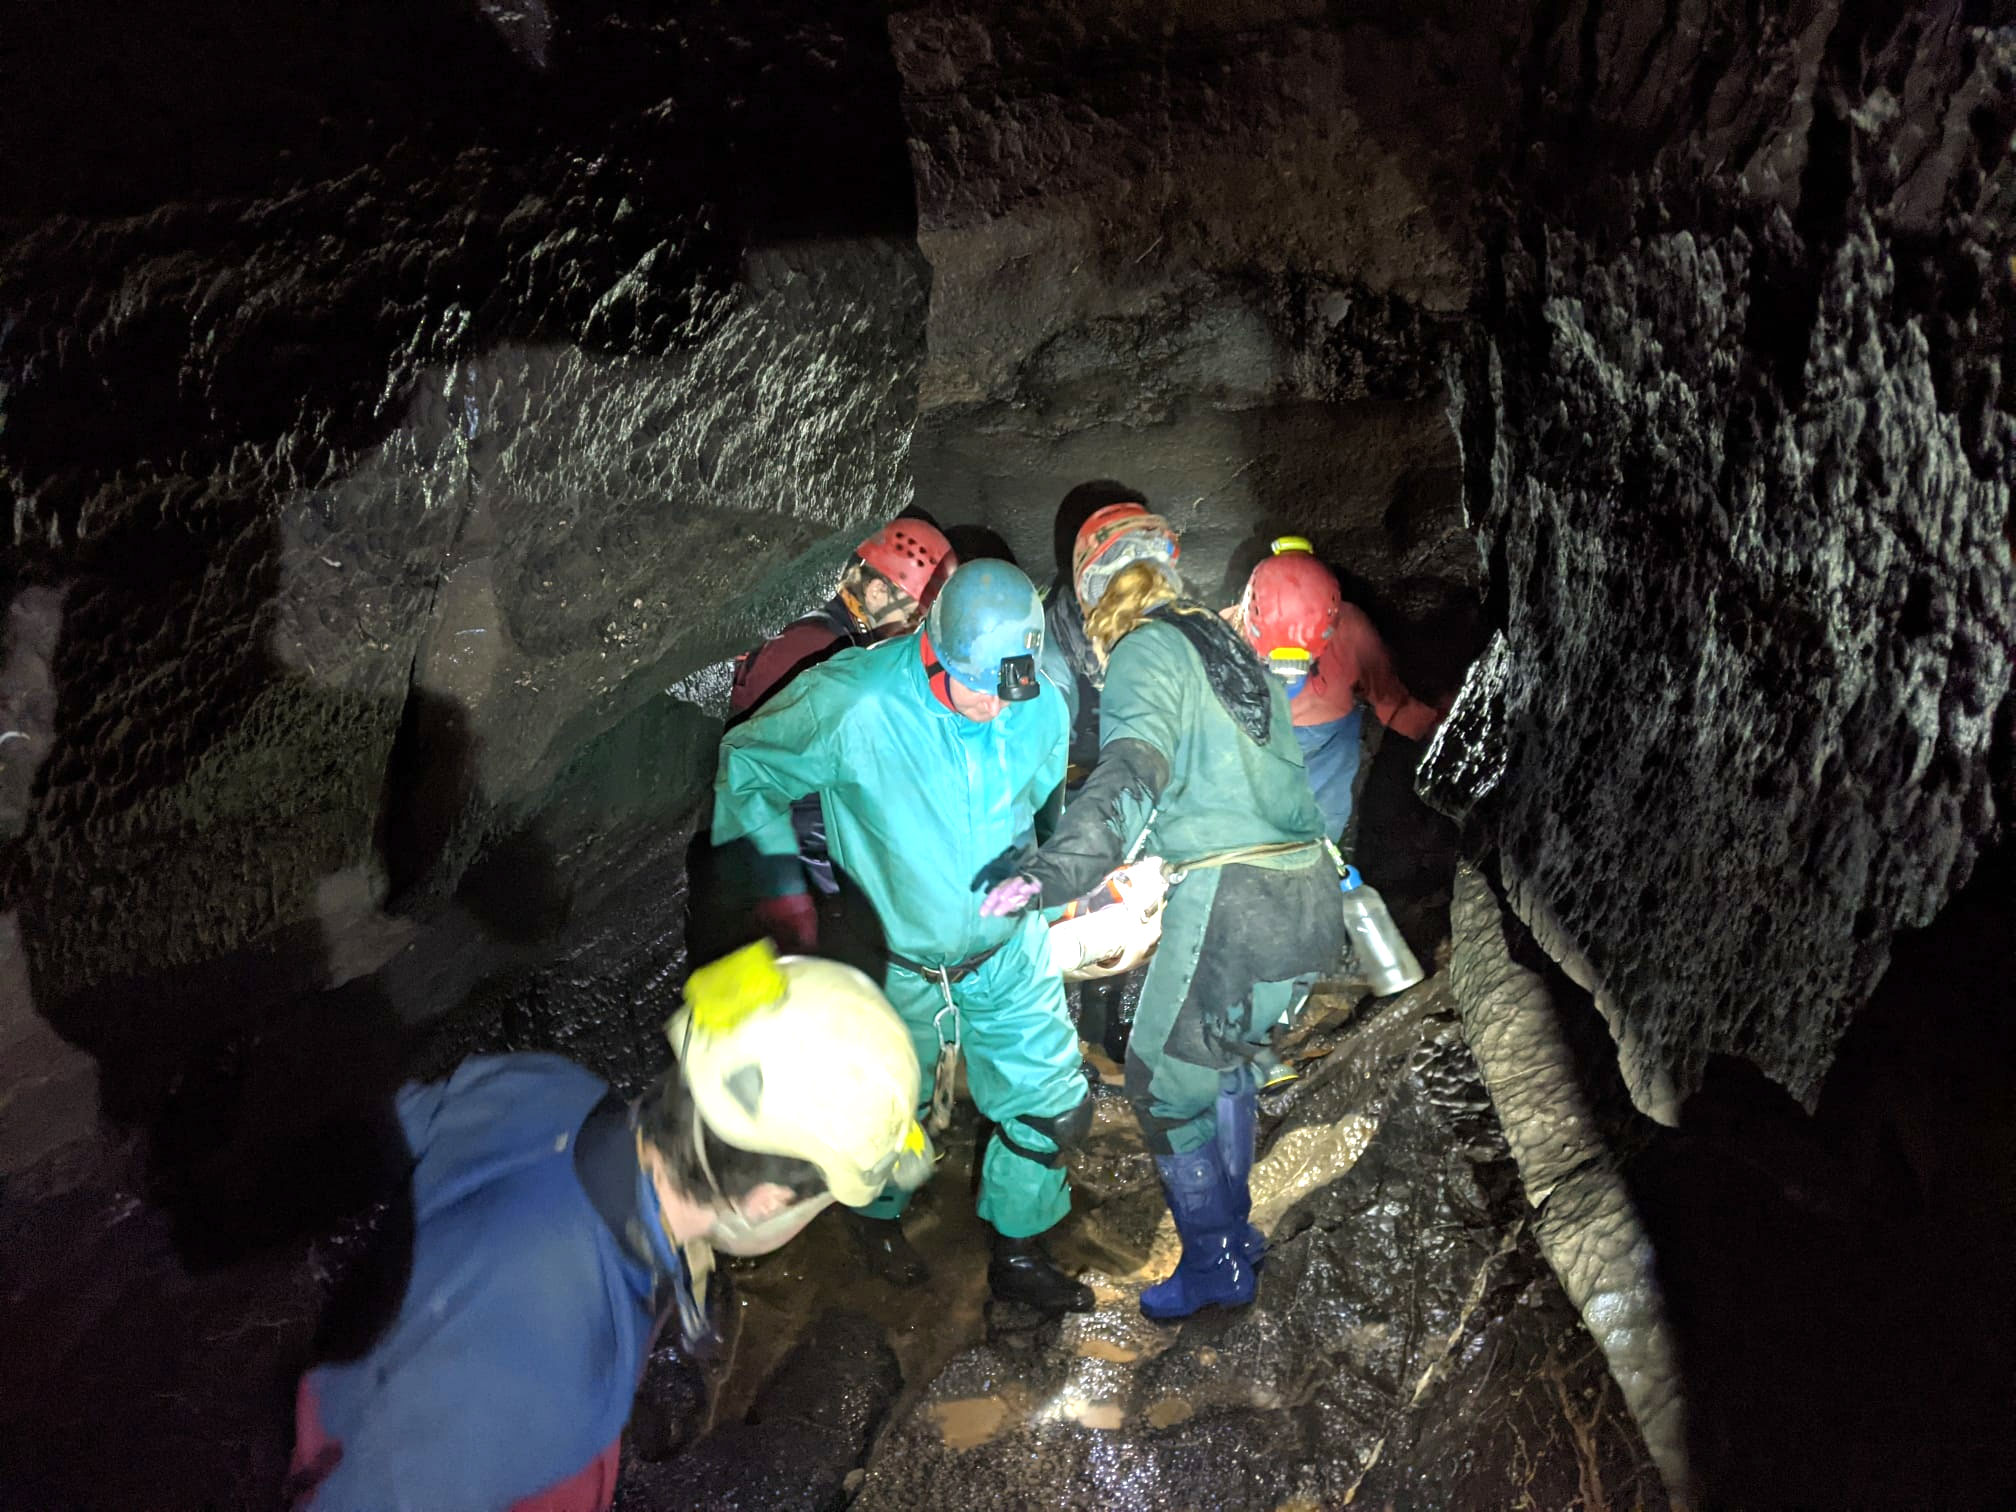 The caver had been trapped since Saturday at around 1pm (local time) after suffering a fall.